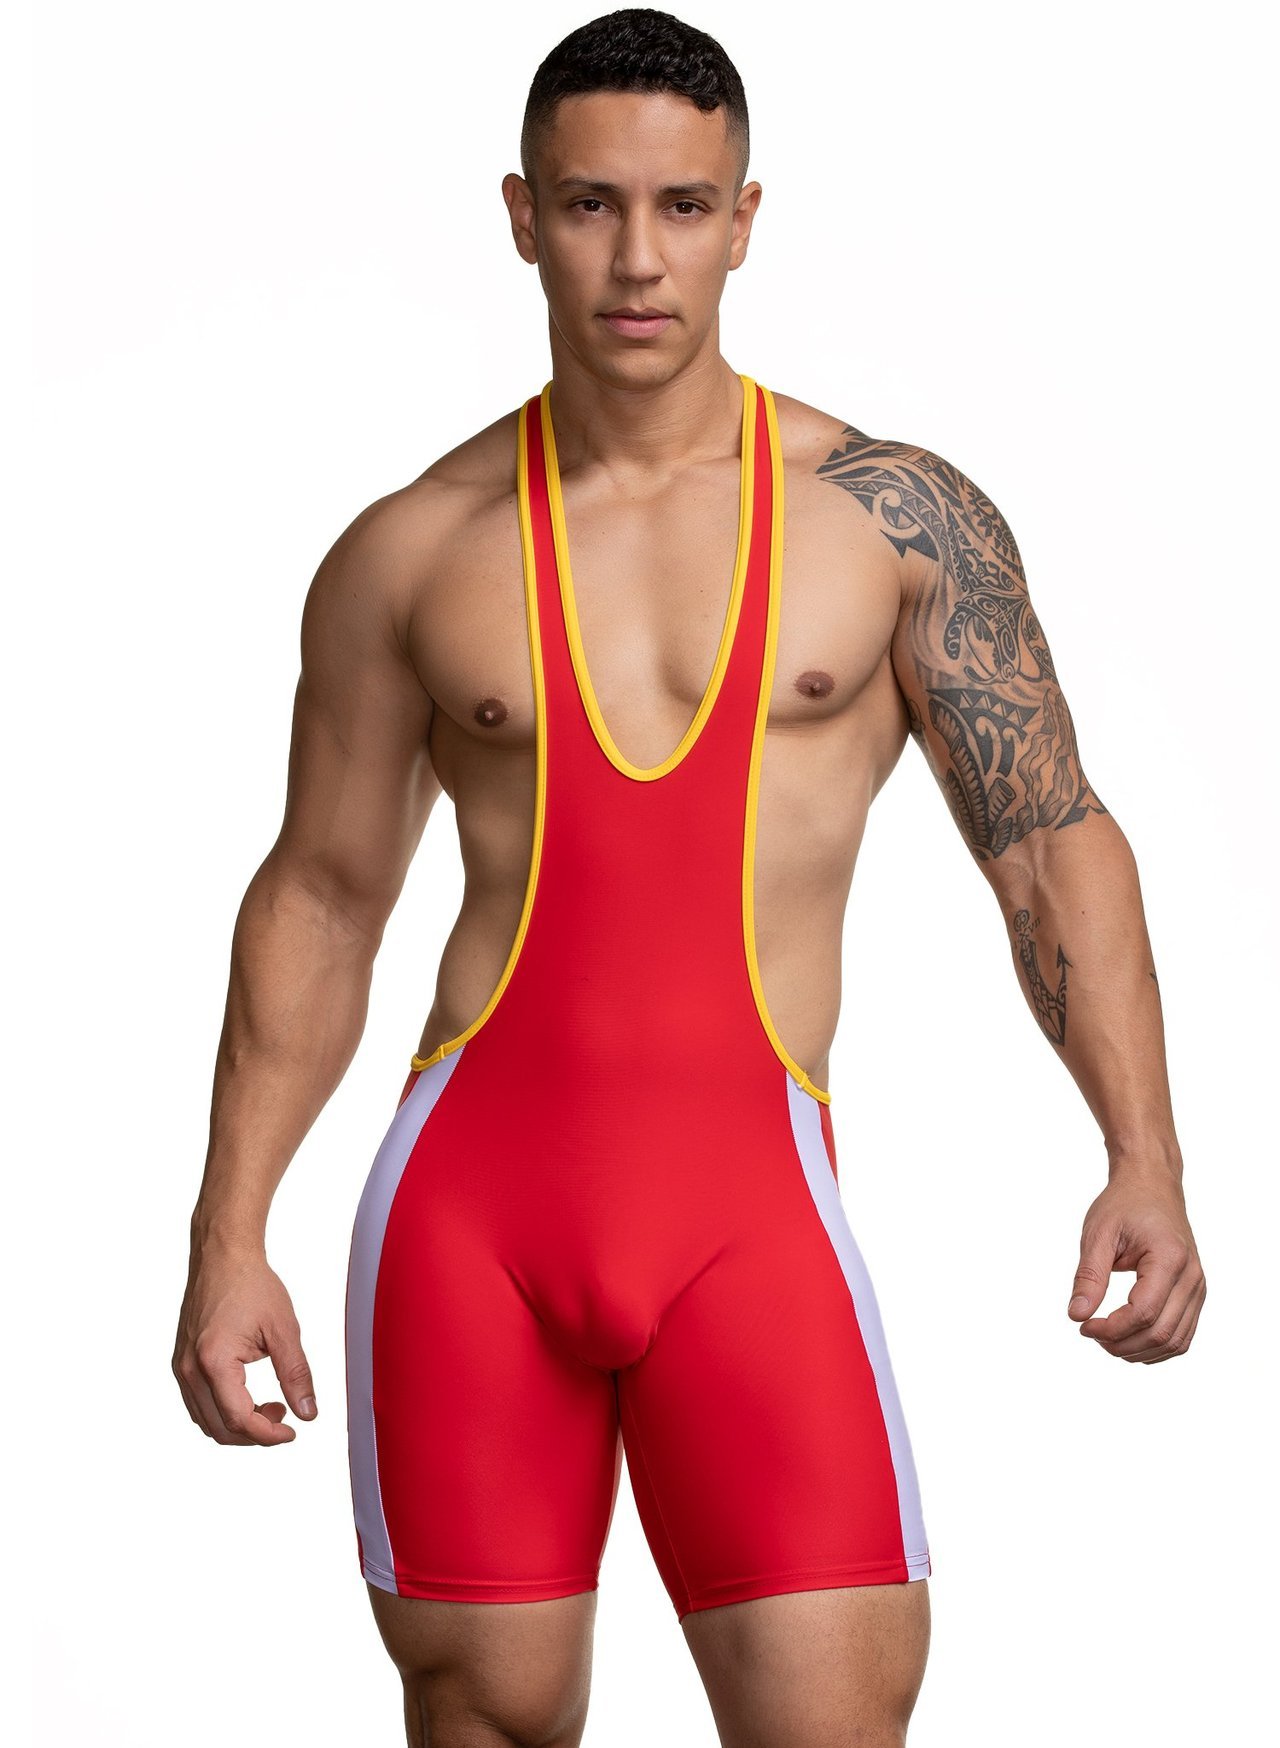 The University Singlet is back! our classic wrestler returns with it’s ...